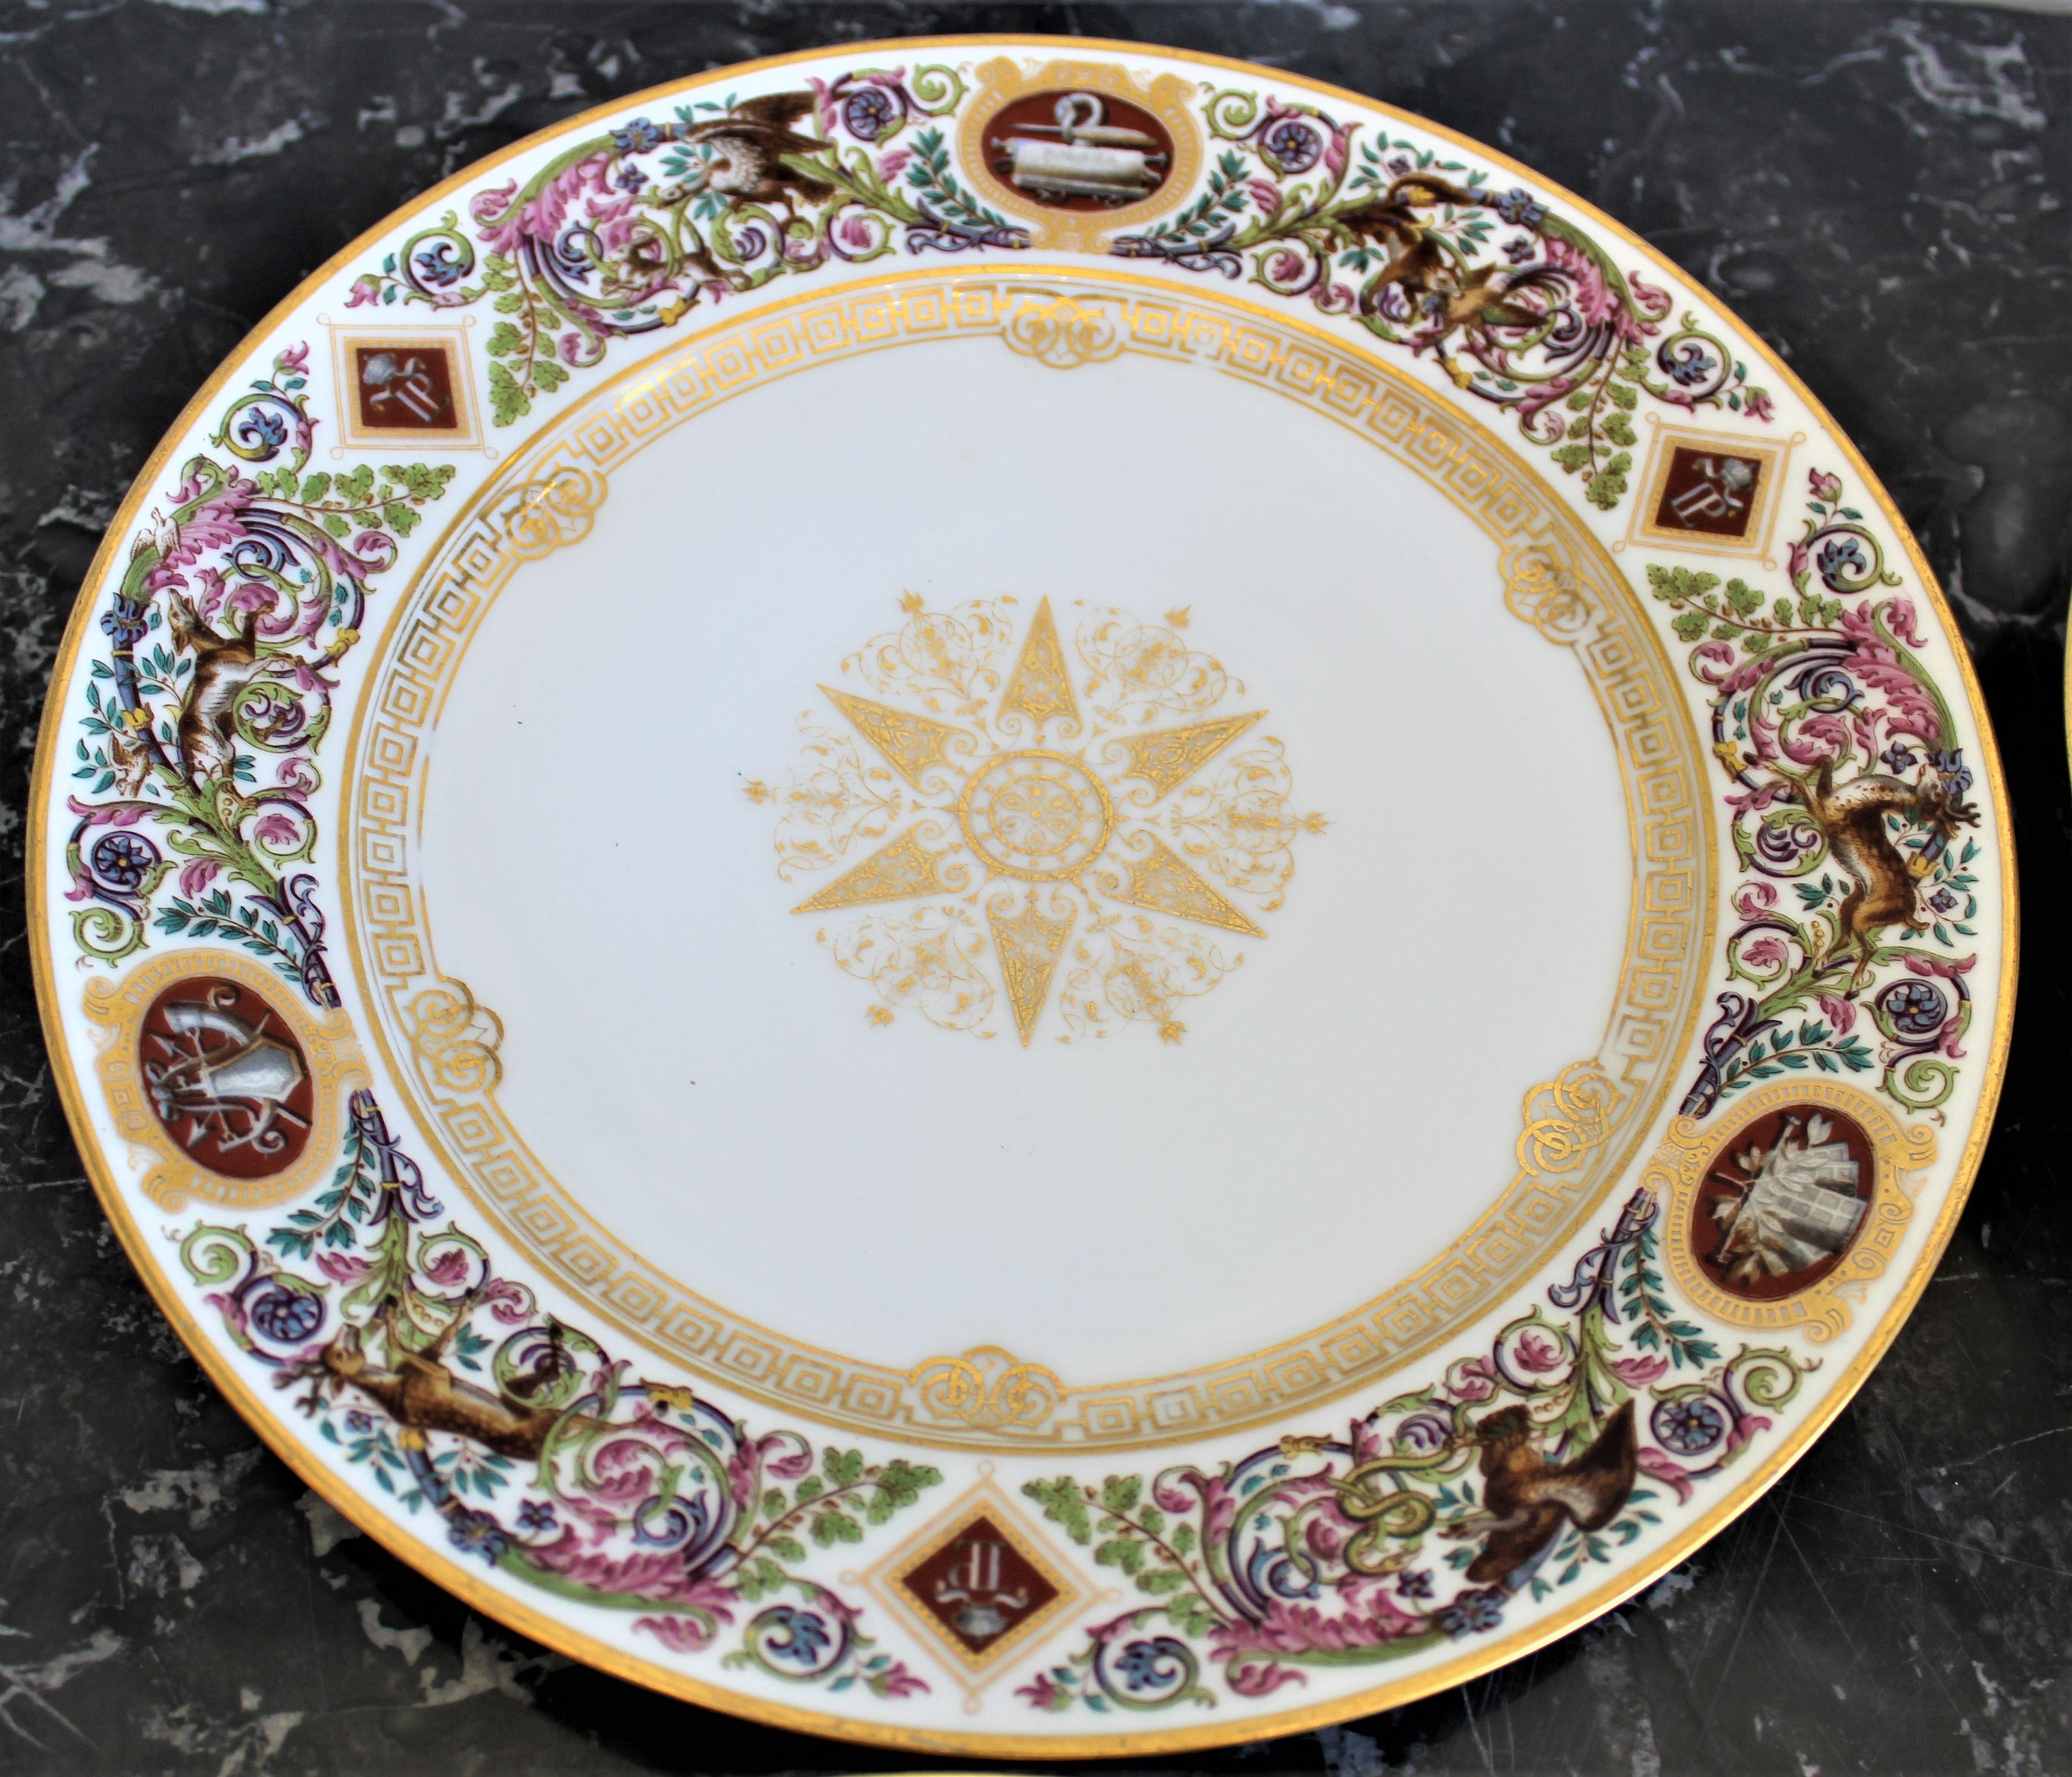  Sevres Chateau de Fountainbleu Pattern French Dinner or Cabinet Plates: 6 10